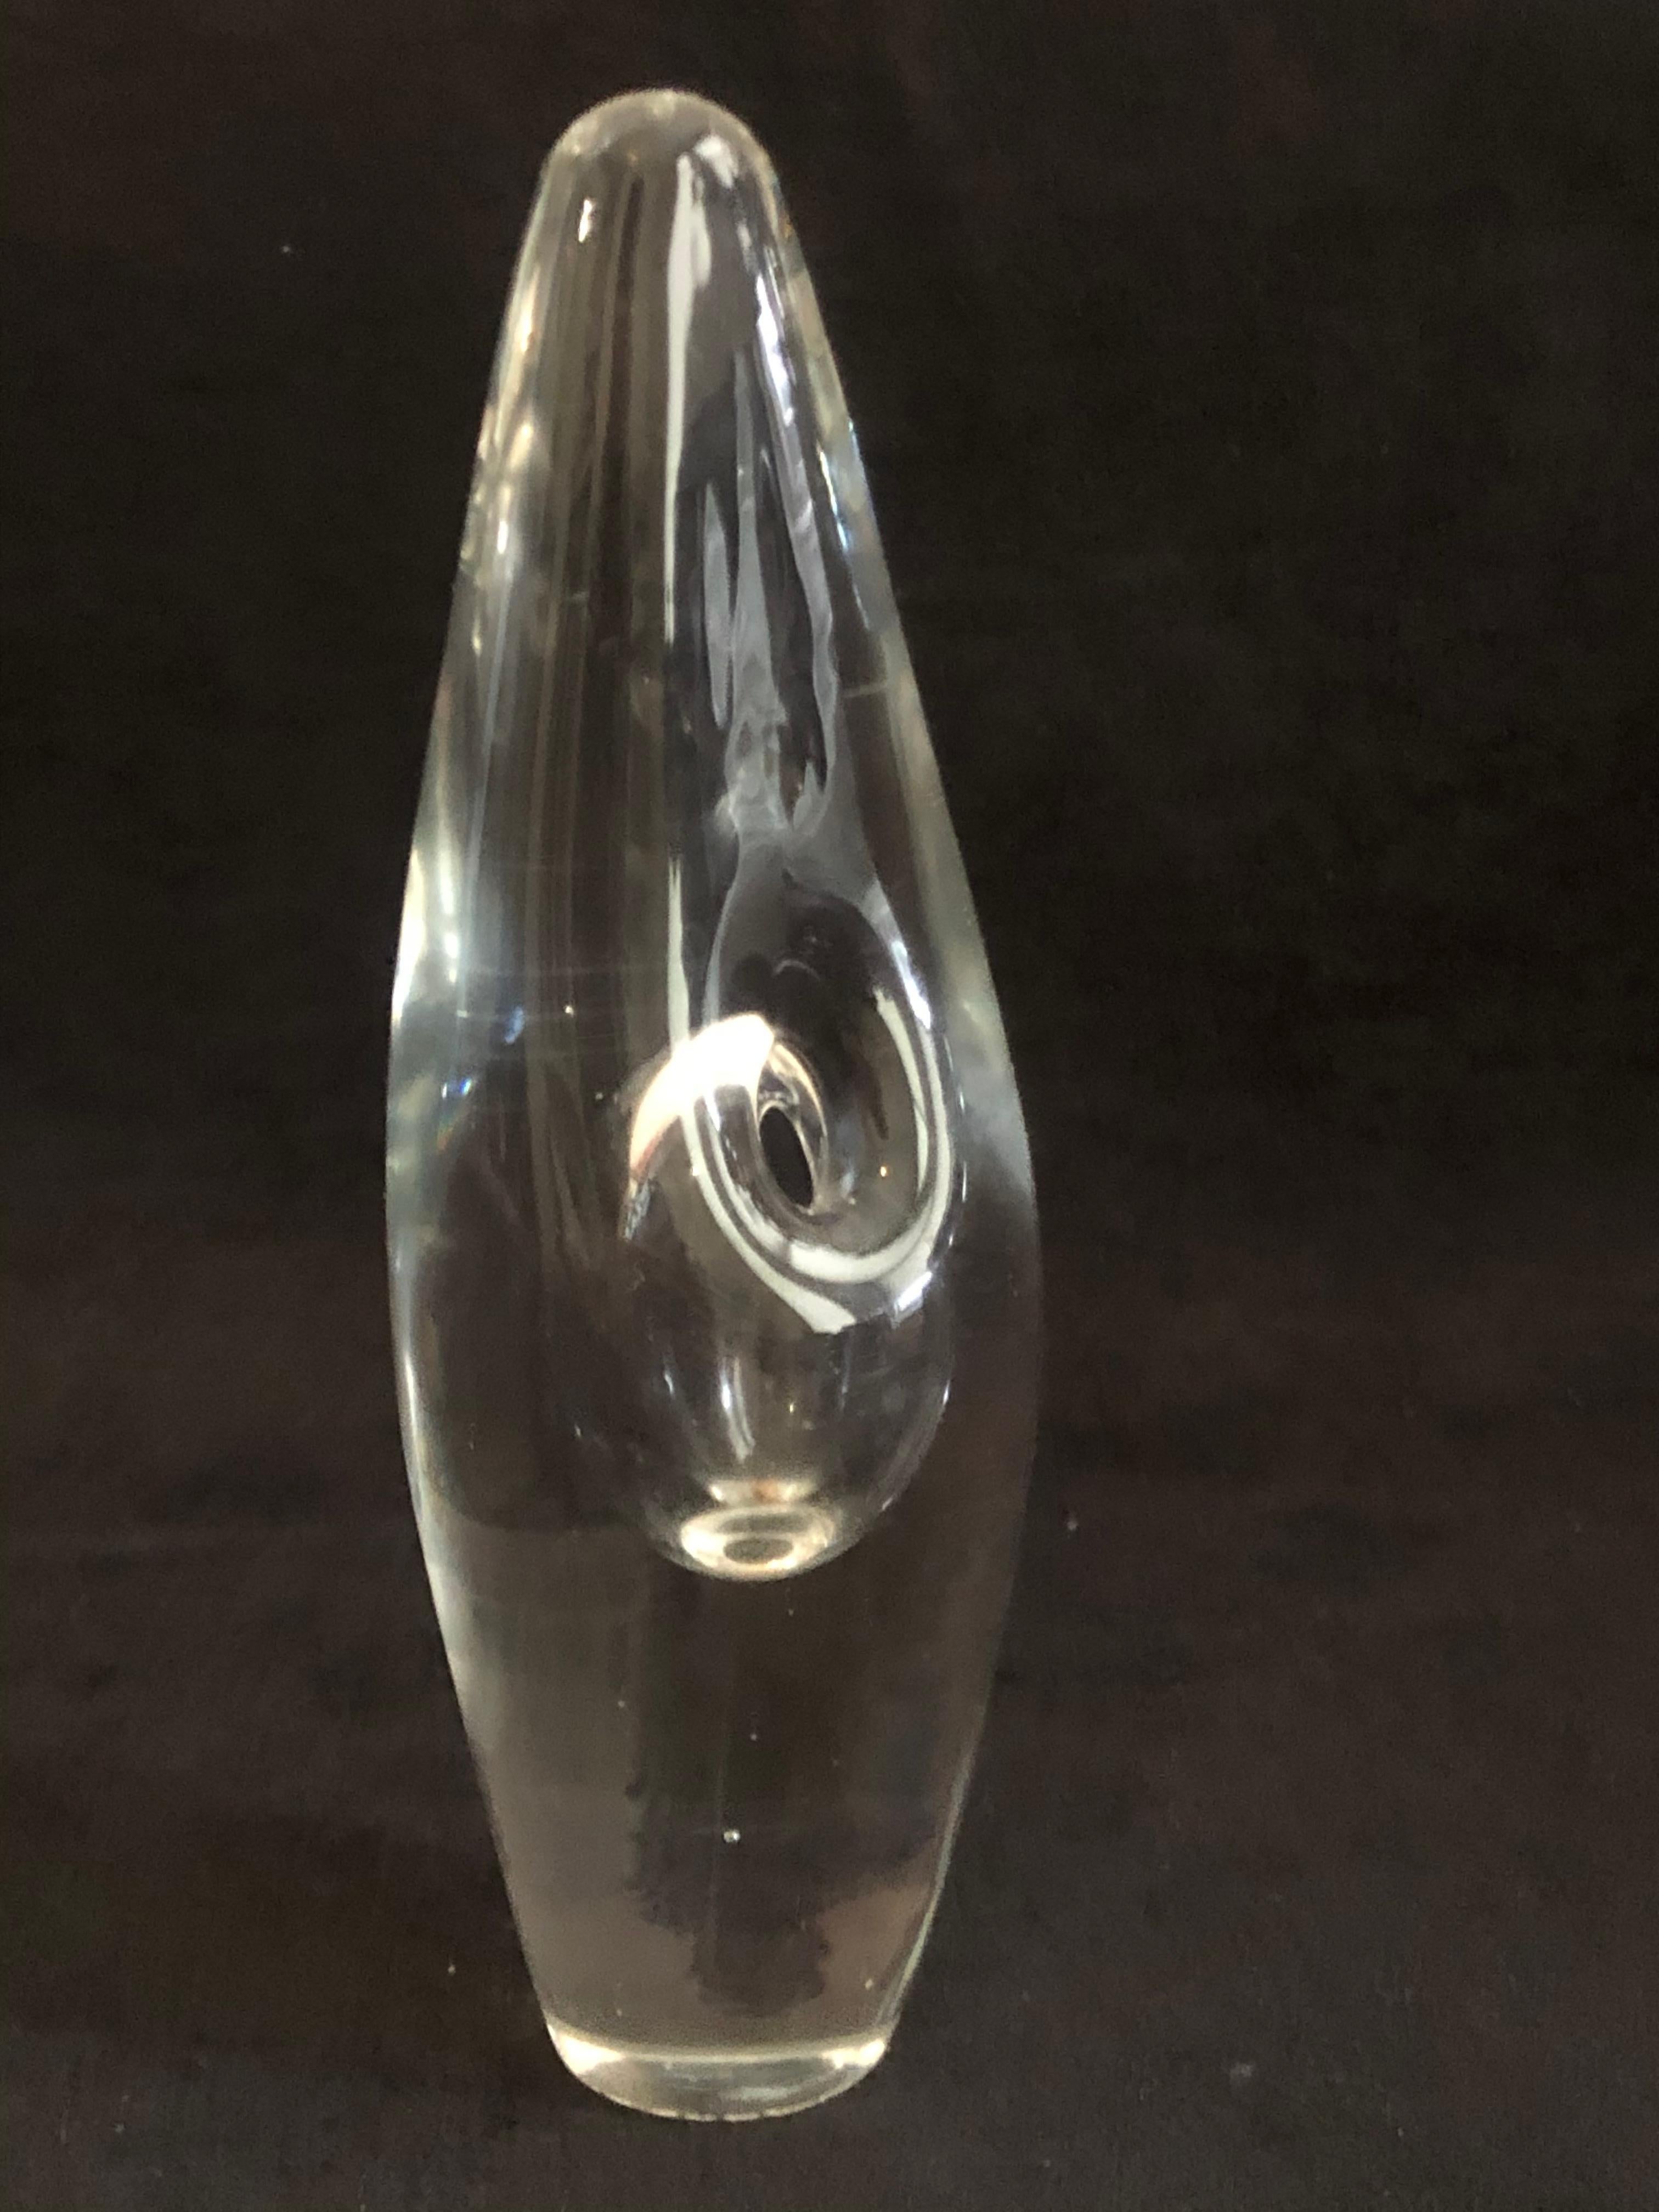 A 1950s 'Orkidea' (Orchid) Glass Vase by Timo Sarpaneva for Iittala, Finland.

Originally designed in 1953, the piece was initially intended as a sculpture, for which the artist was awarded a Gand Prix at the X Milan Triennale, in